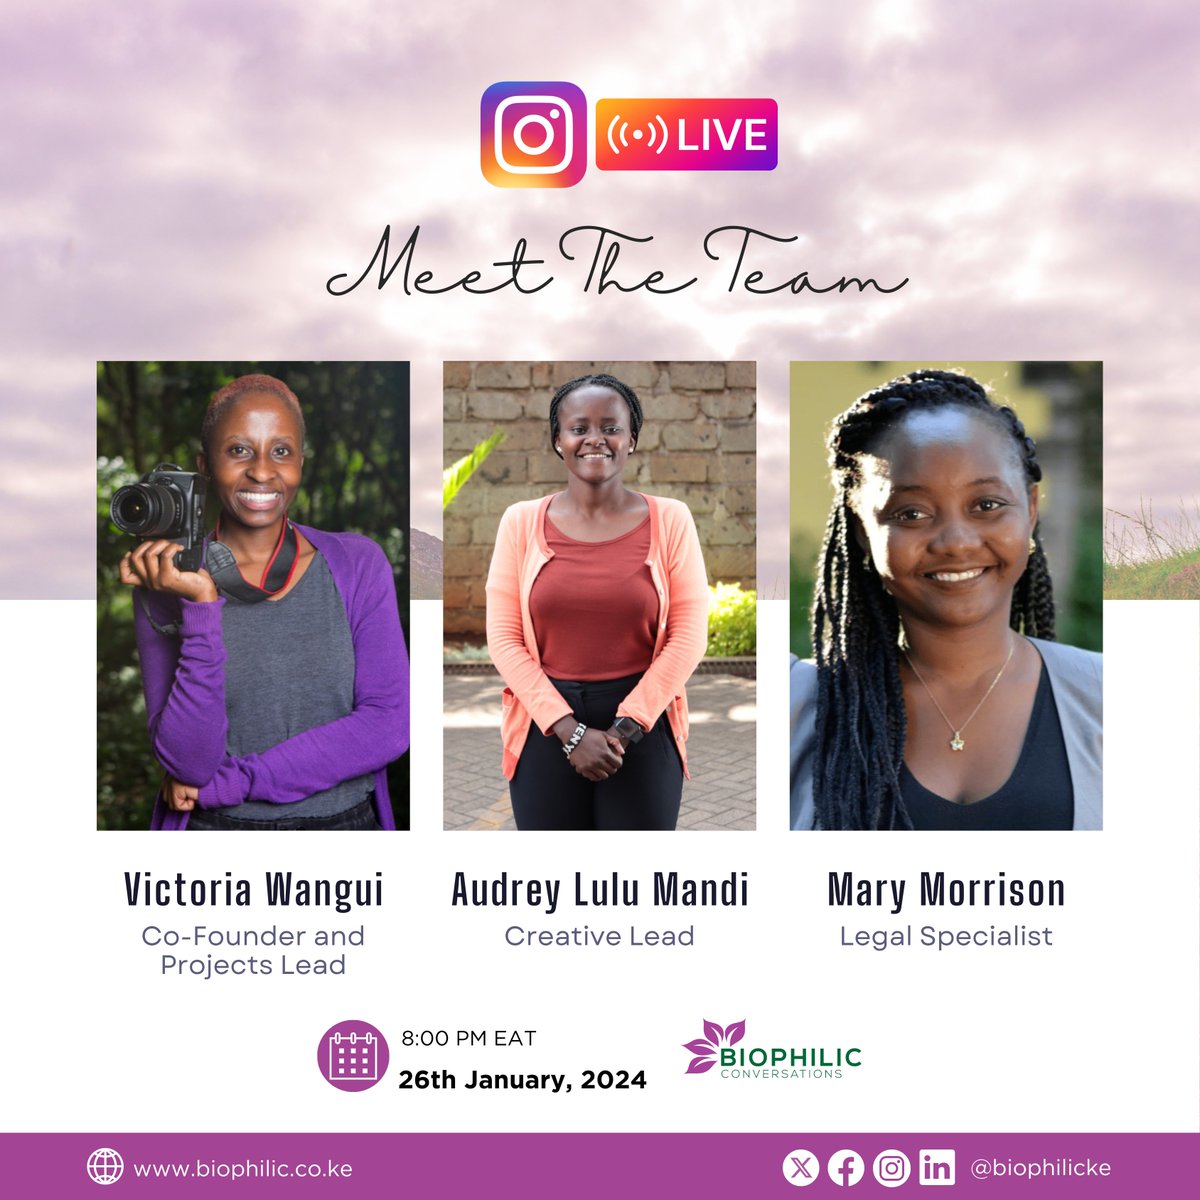 THIS FRIDAY!!

26th January 2024 at 8:00 pm. 

INSTAGRAM LIVE!!!!

Meet the Biophilic Team who curate incredible conversations! 

@vickiwangui @audrey_mandi @mary_morrisonia

#BiophilicConversations #MeetTheTeam #BiophilicSpace #BiophilicLive